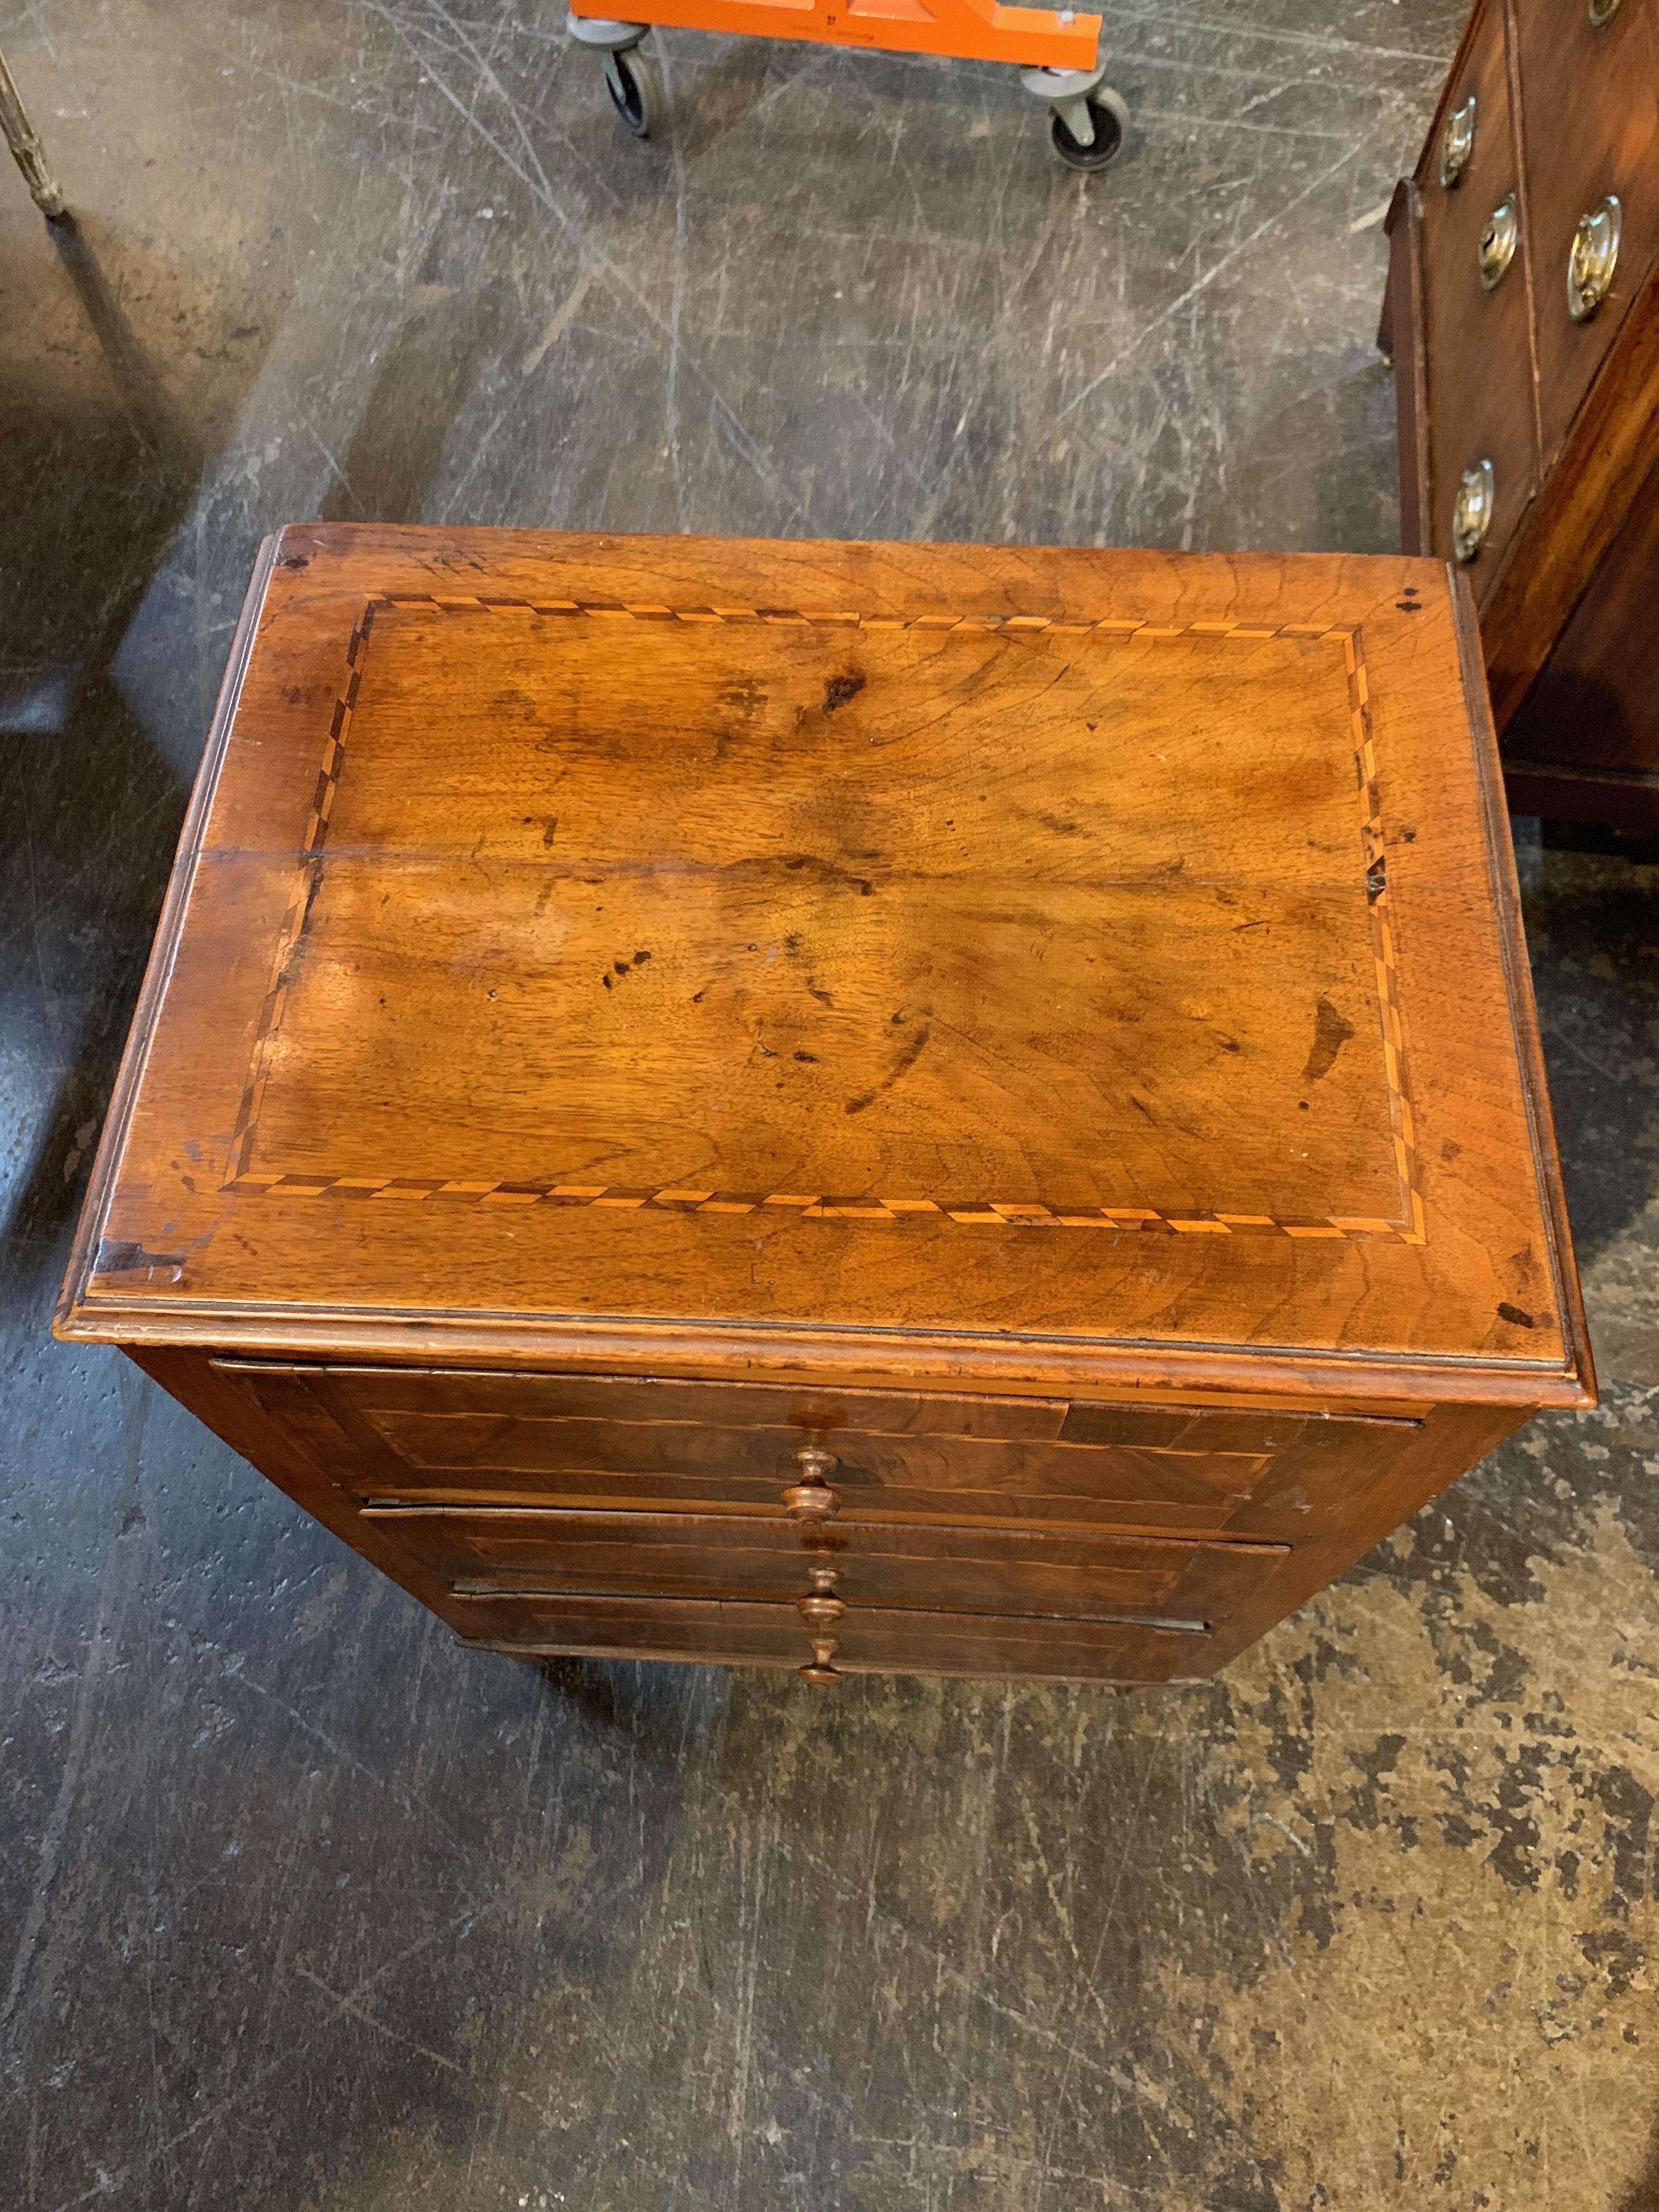 Very handsome early 19th century 3-drawer walnut side table. Nice inlay detail on the drawers and on the top. A functional piece.